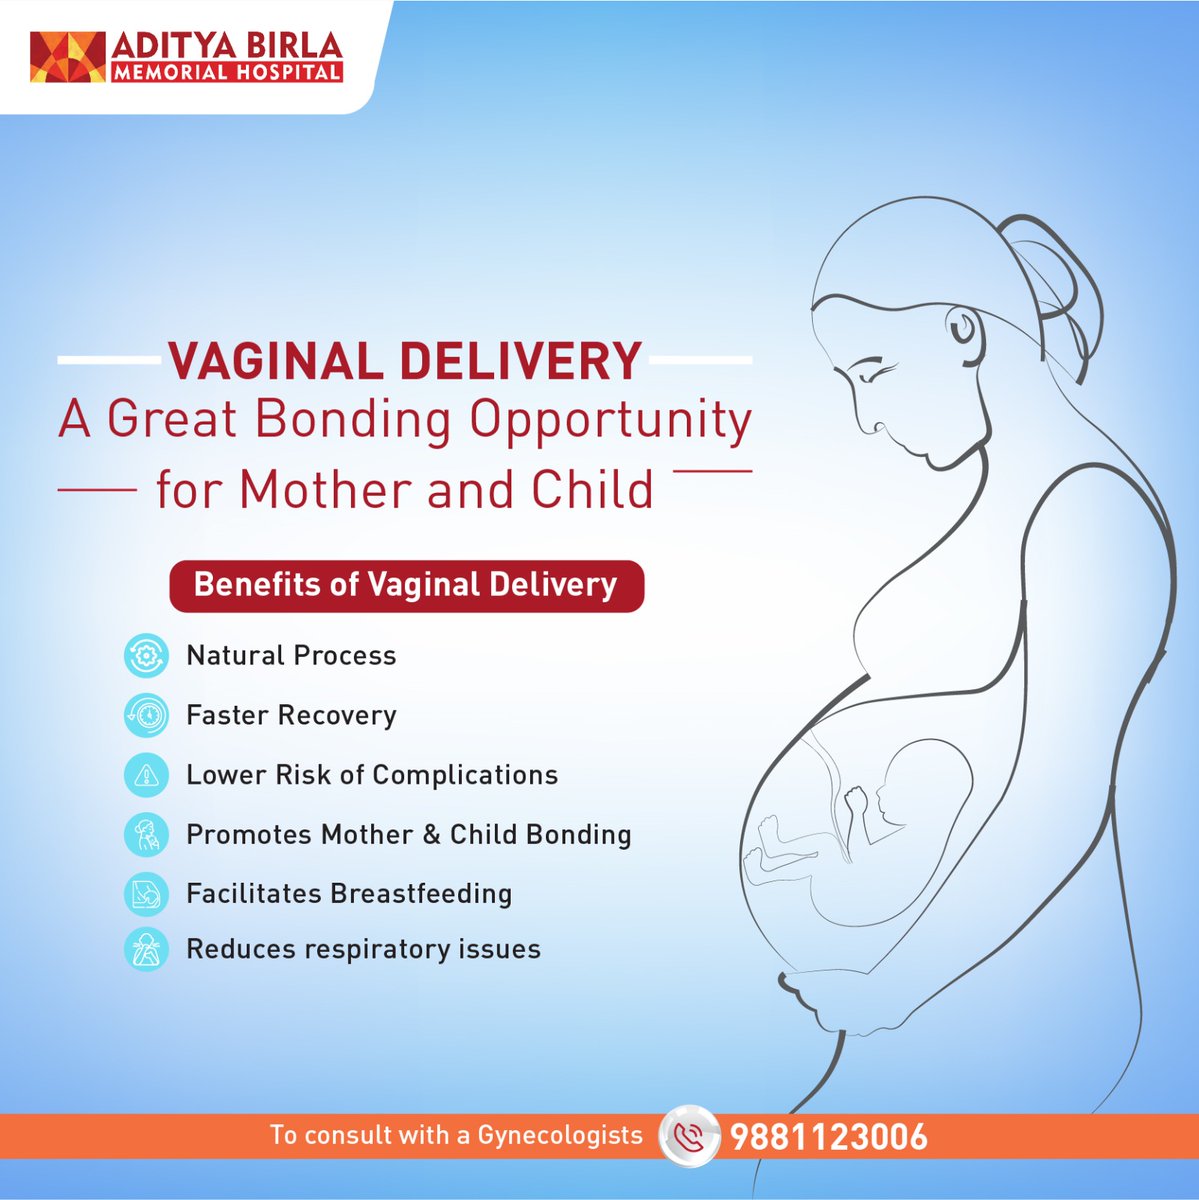 More than just childbirth, Vaginal delivery offers a natural bonding experience for mother & baby. Learn the benefits & discuss your options with our doctor.

To book an appointment with a Gynecologist, call us at 9881123006

#ABMH #adityabirlamemoriahospita #normaldelivery